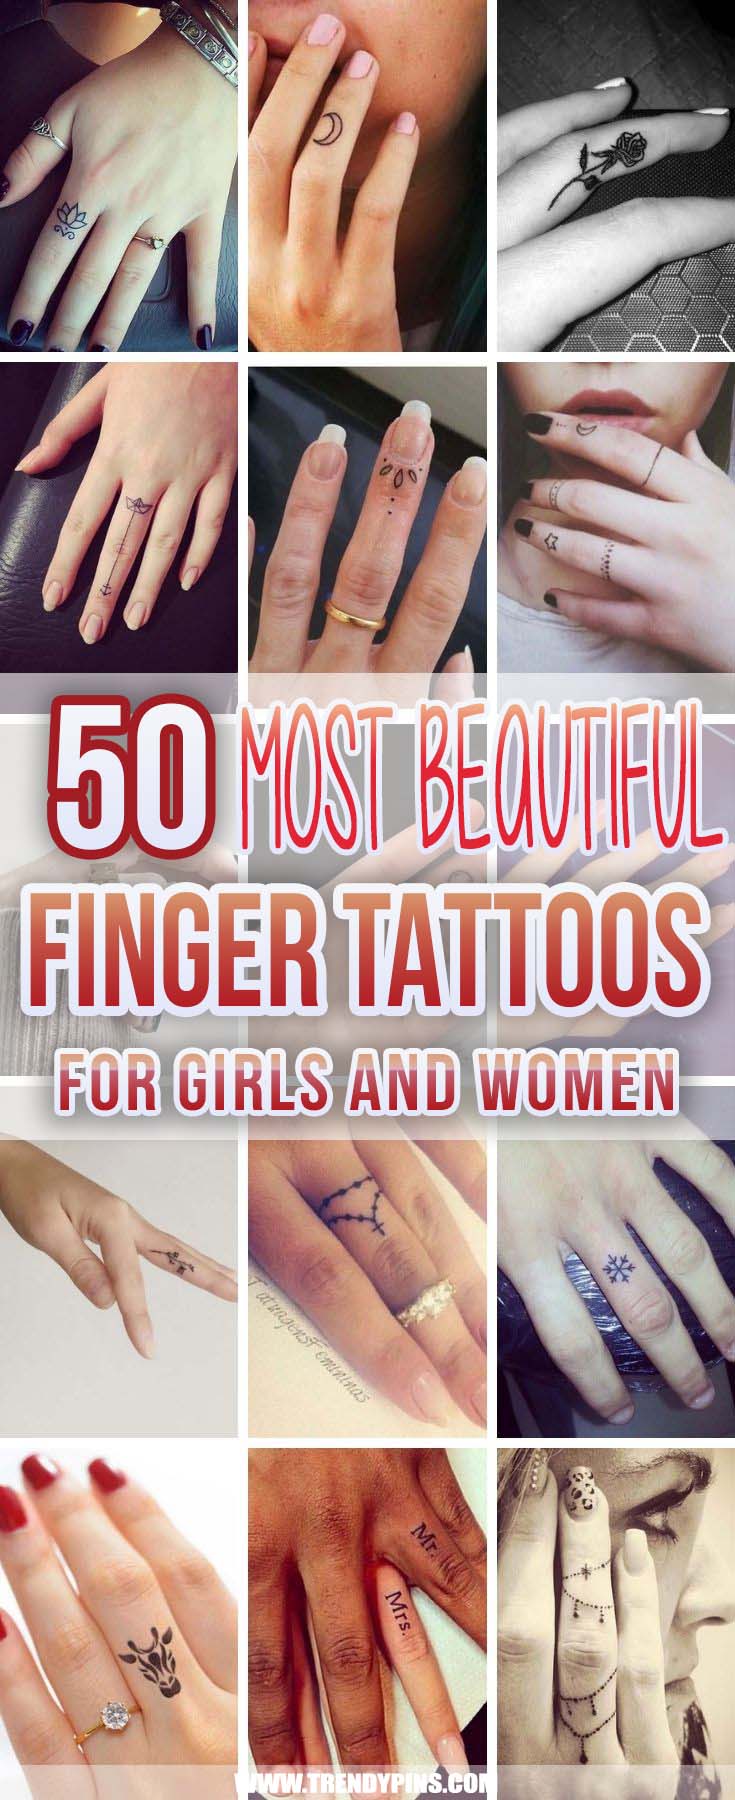 50 Most Beautiful Finger Tattoos For Girls And Women #tattoofinger #trendypins